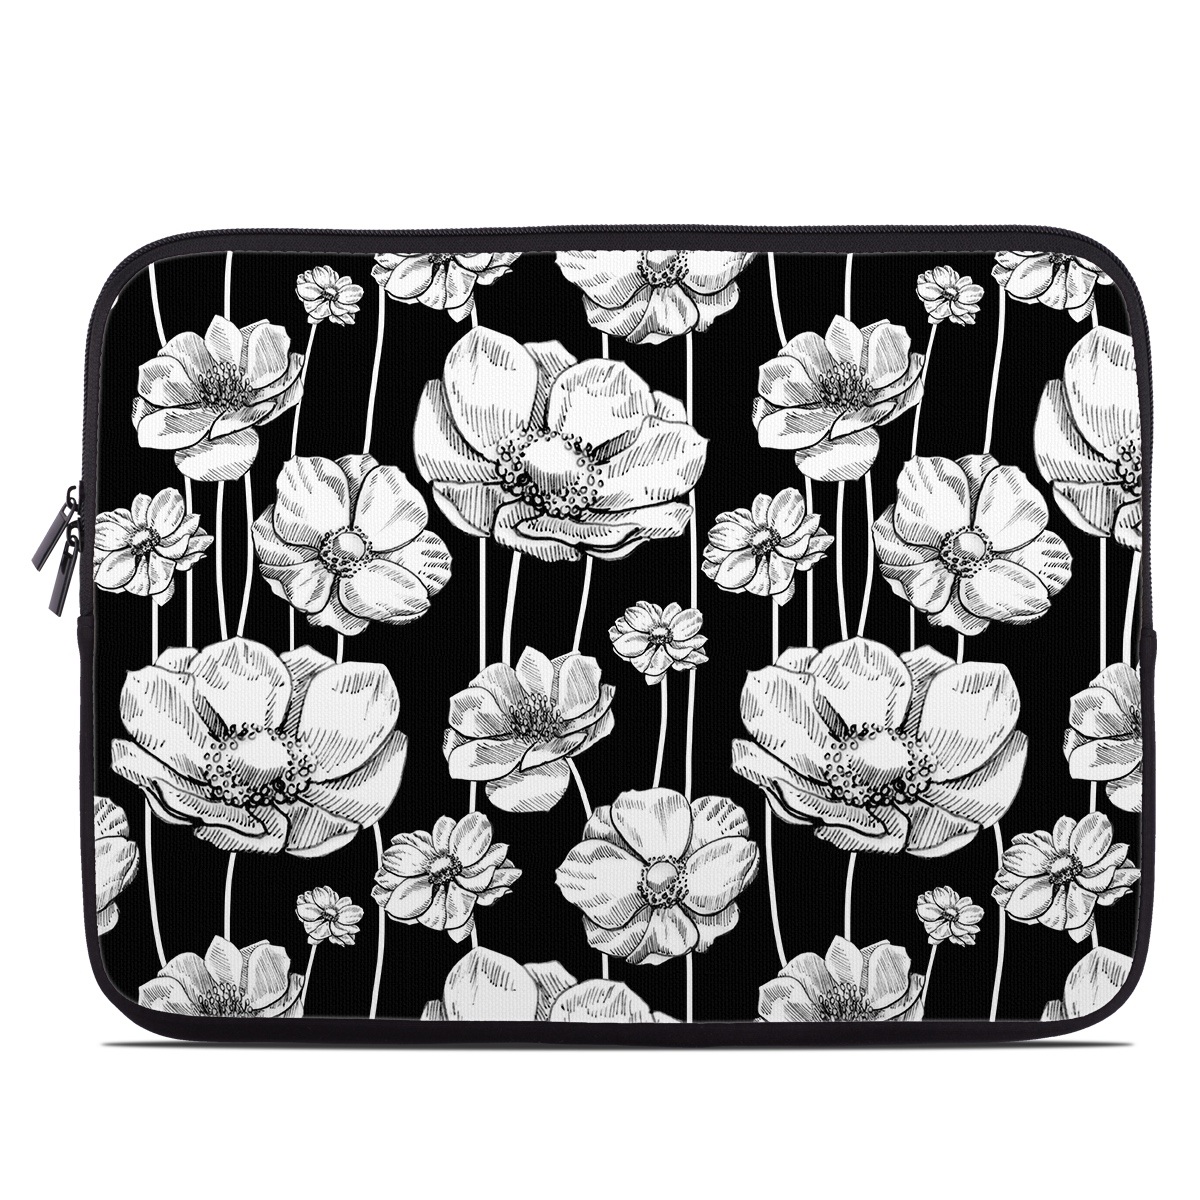 Laptop Sleeve - Striped Blooms (Image 1)